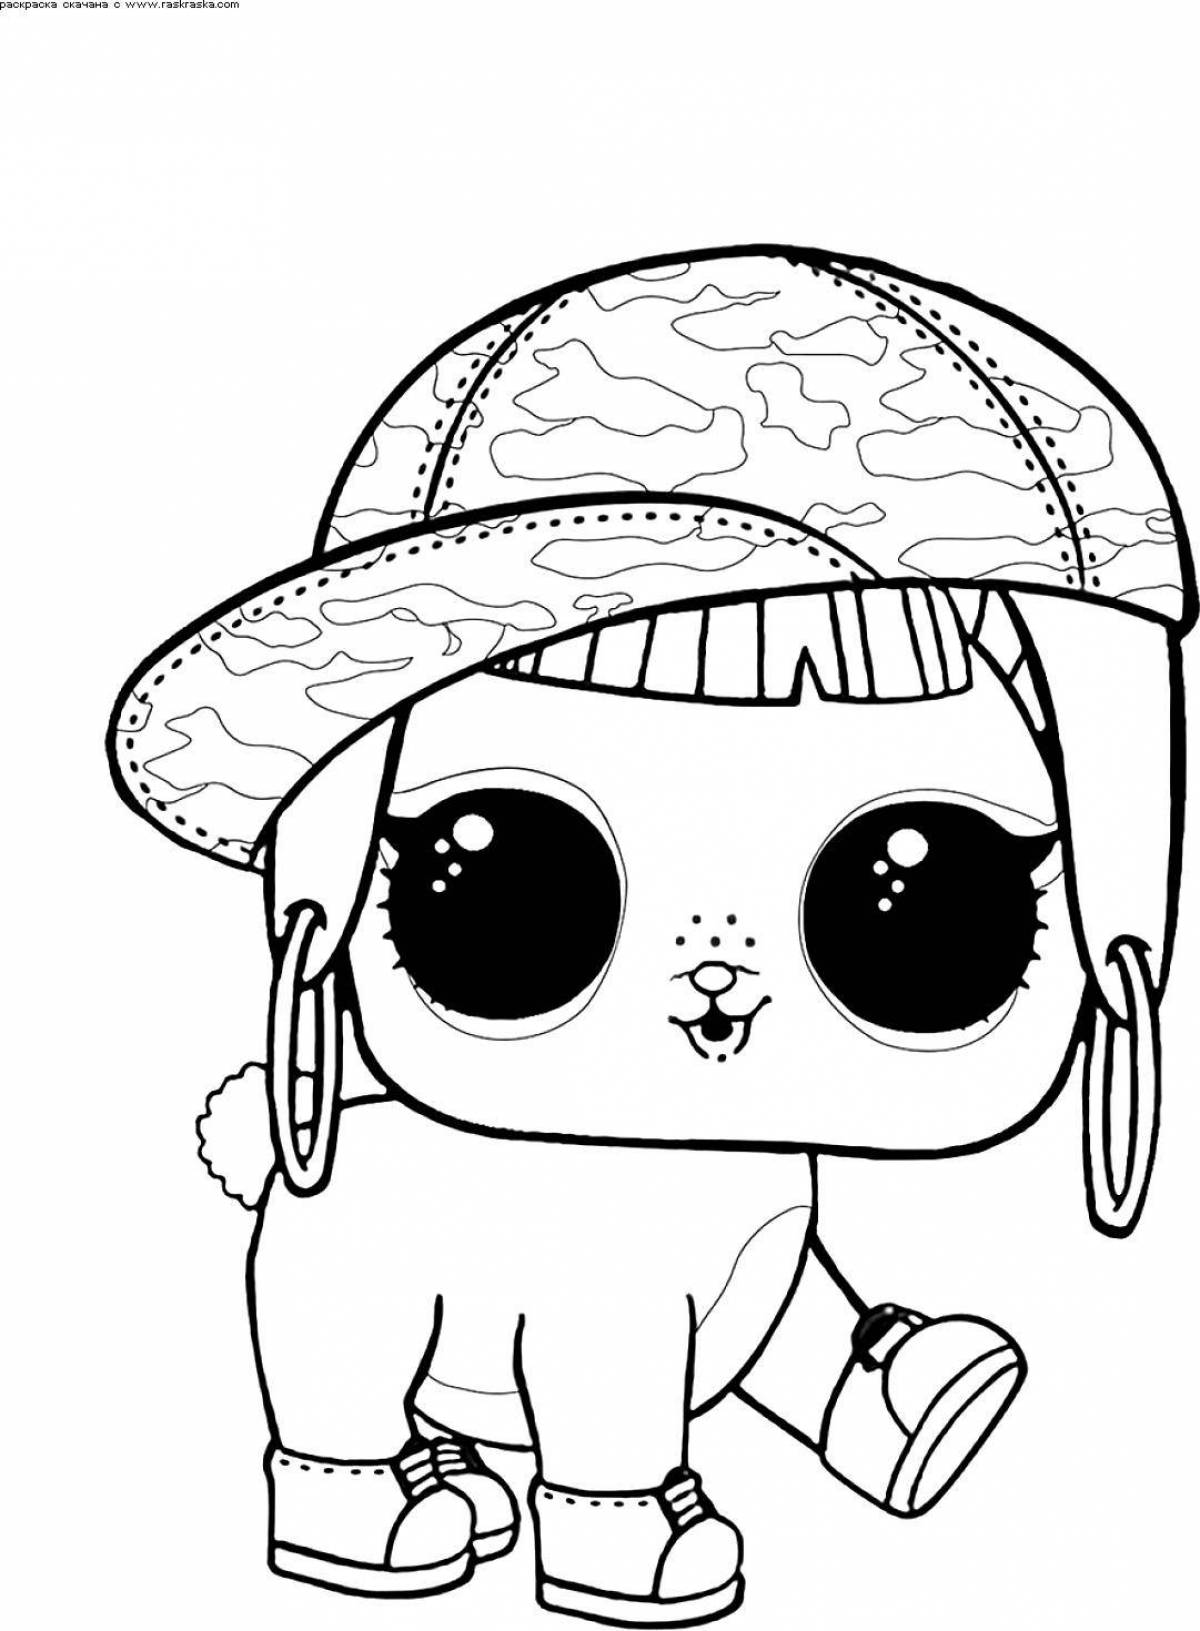 Radiant lol pets coloring pages